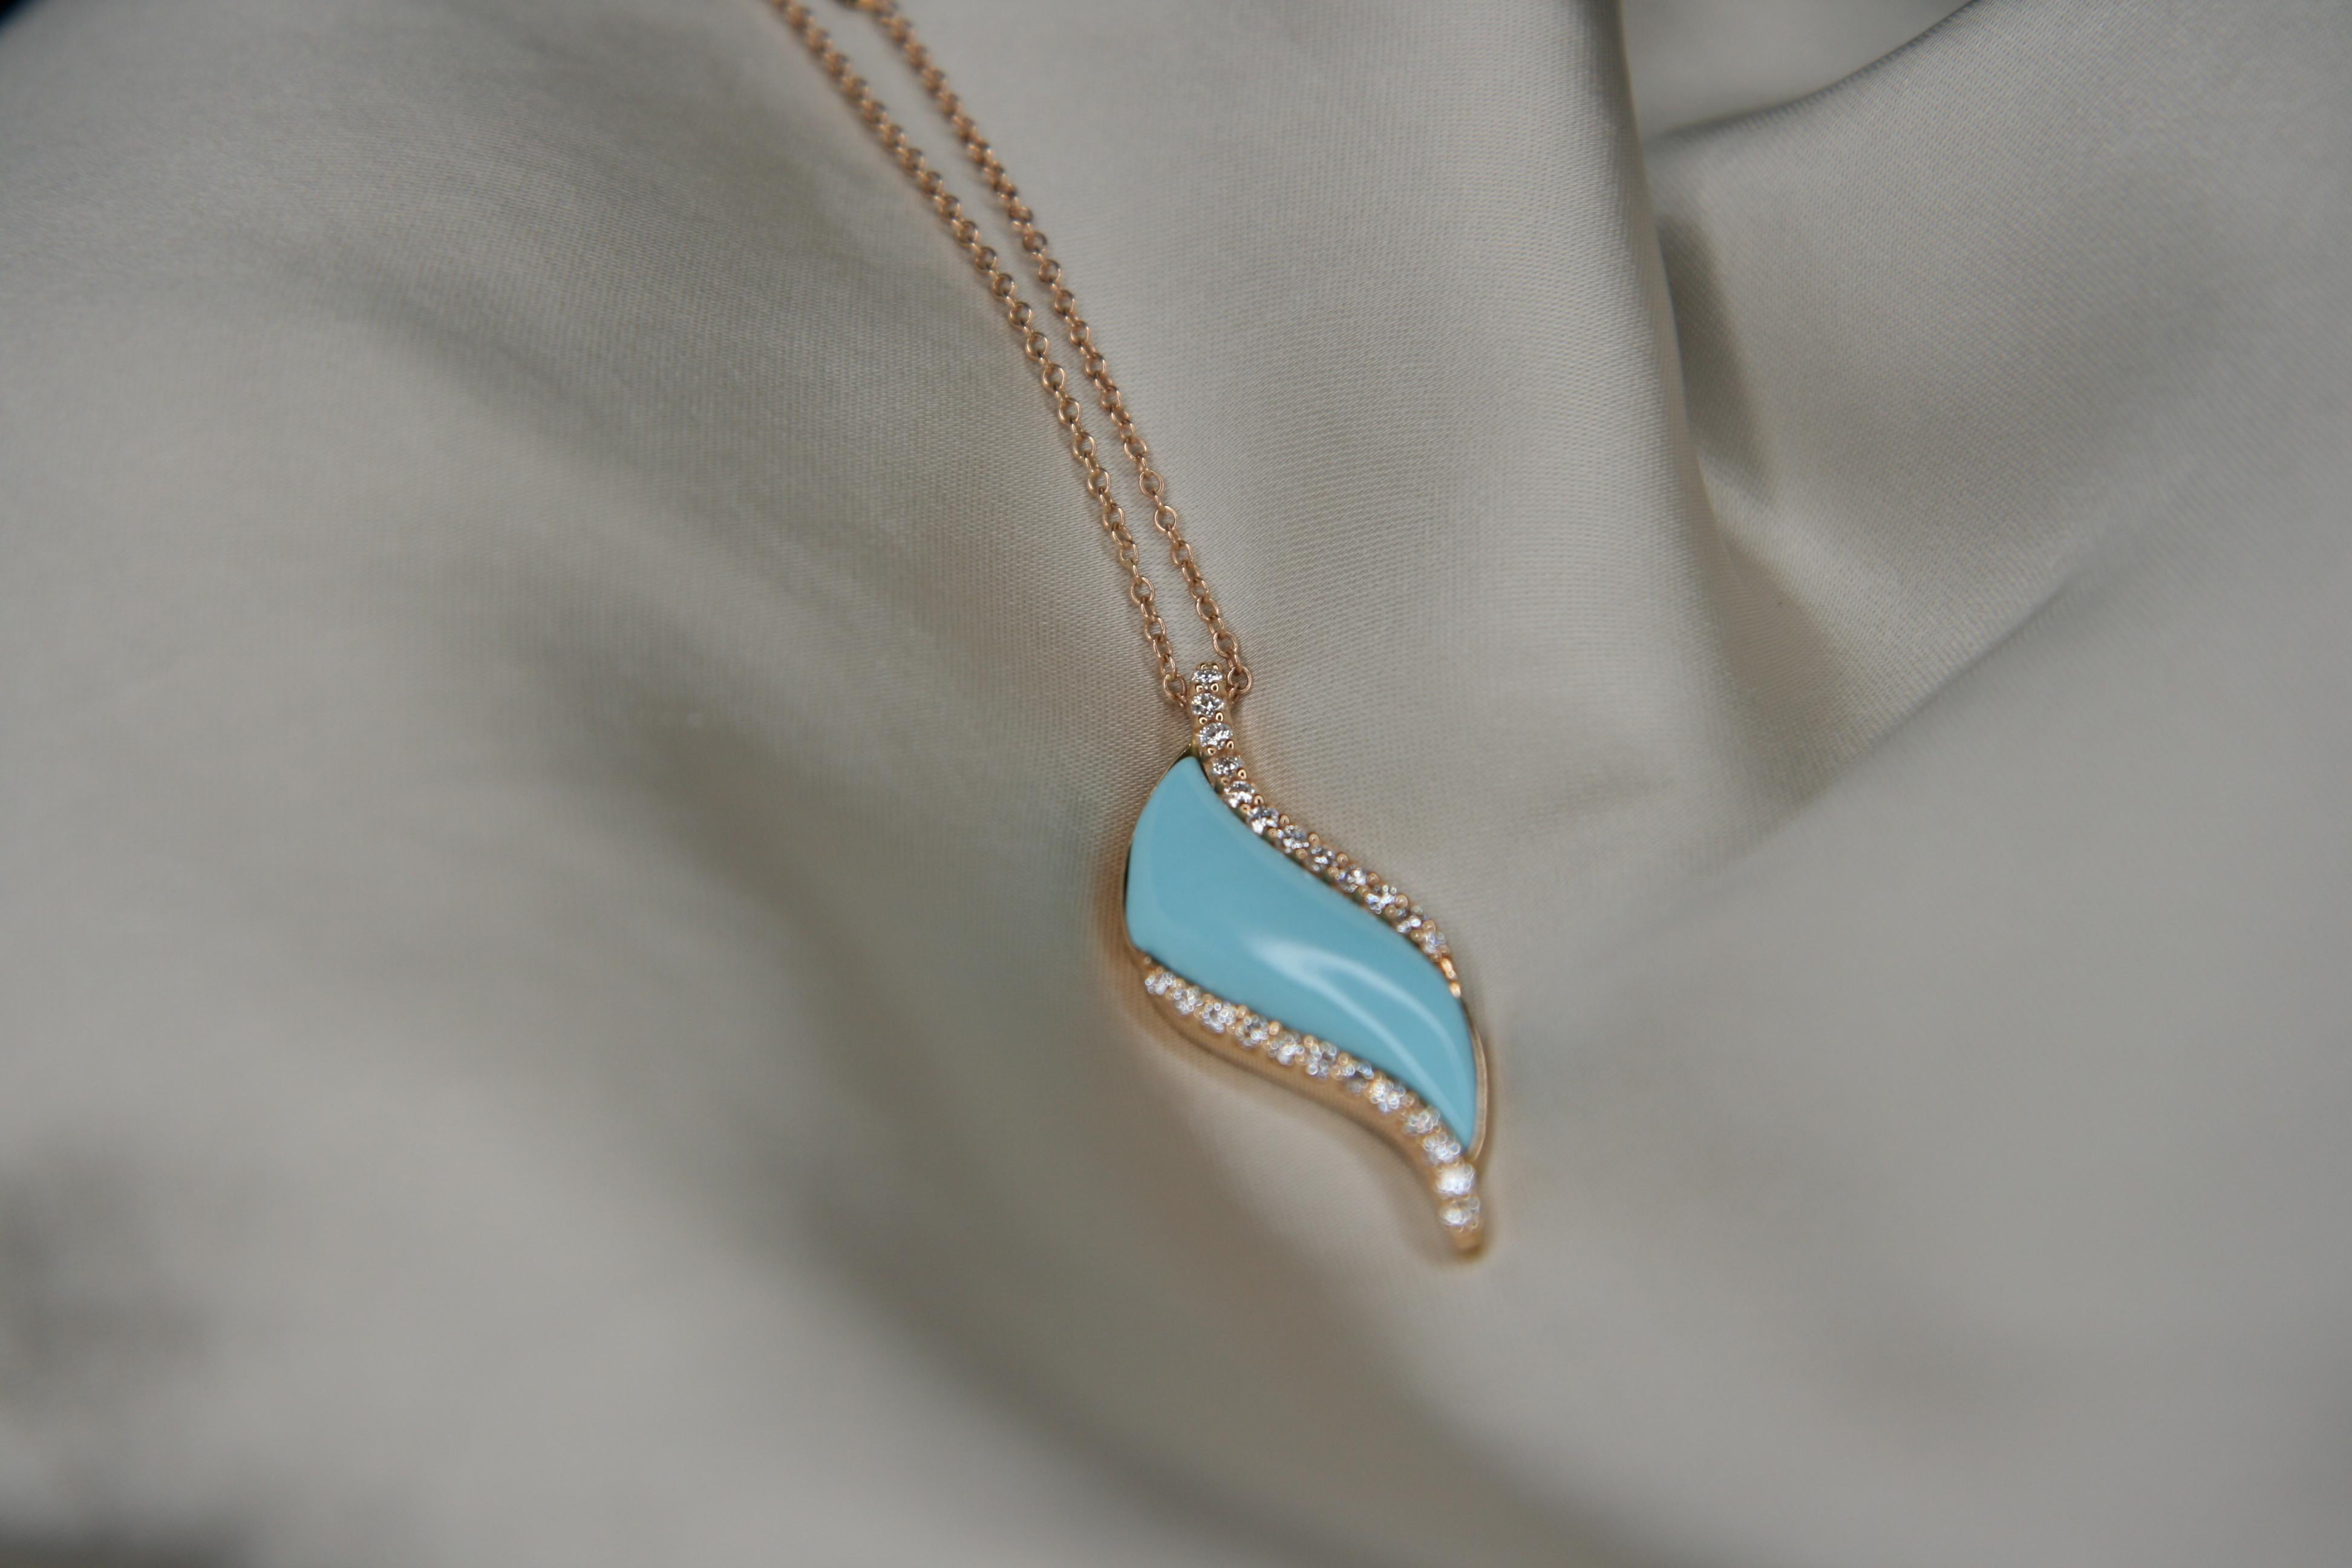 This wonderful Leo Milano pendant from our Conchetta  collection shows in every detail a very complicate yet perfectly done workmanship. The pendant and the chain are in 18 carat rose gold with turquoise paste . The object weights 8.74 grams the